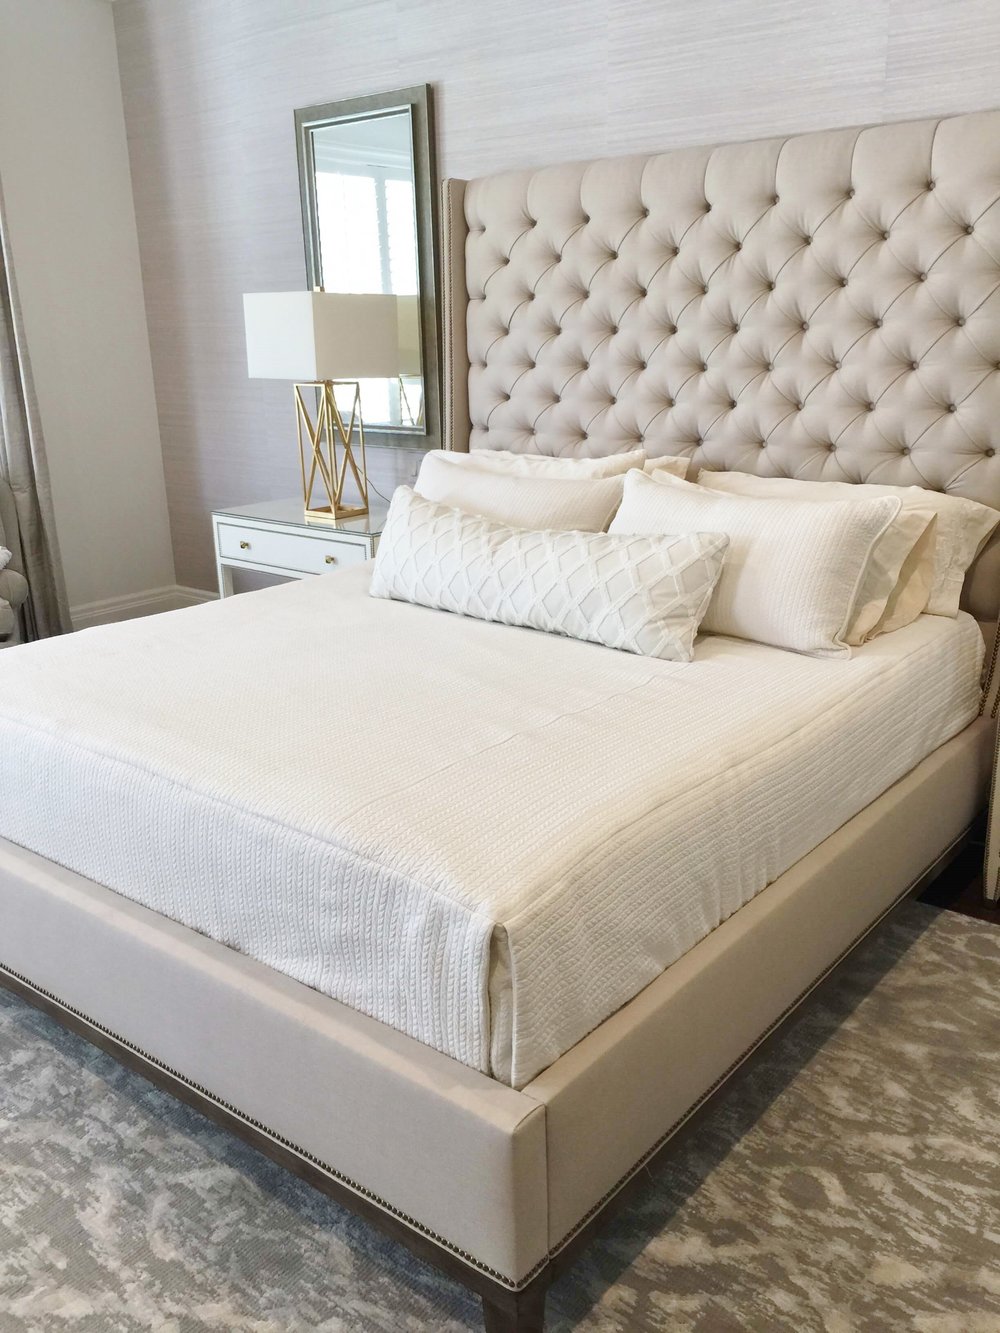 Bedrooms - Change out the wood headboard for a softer, more luxurious